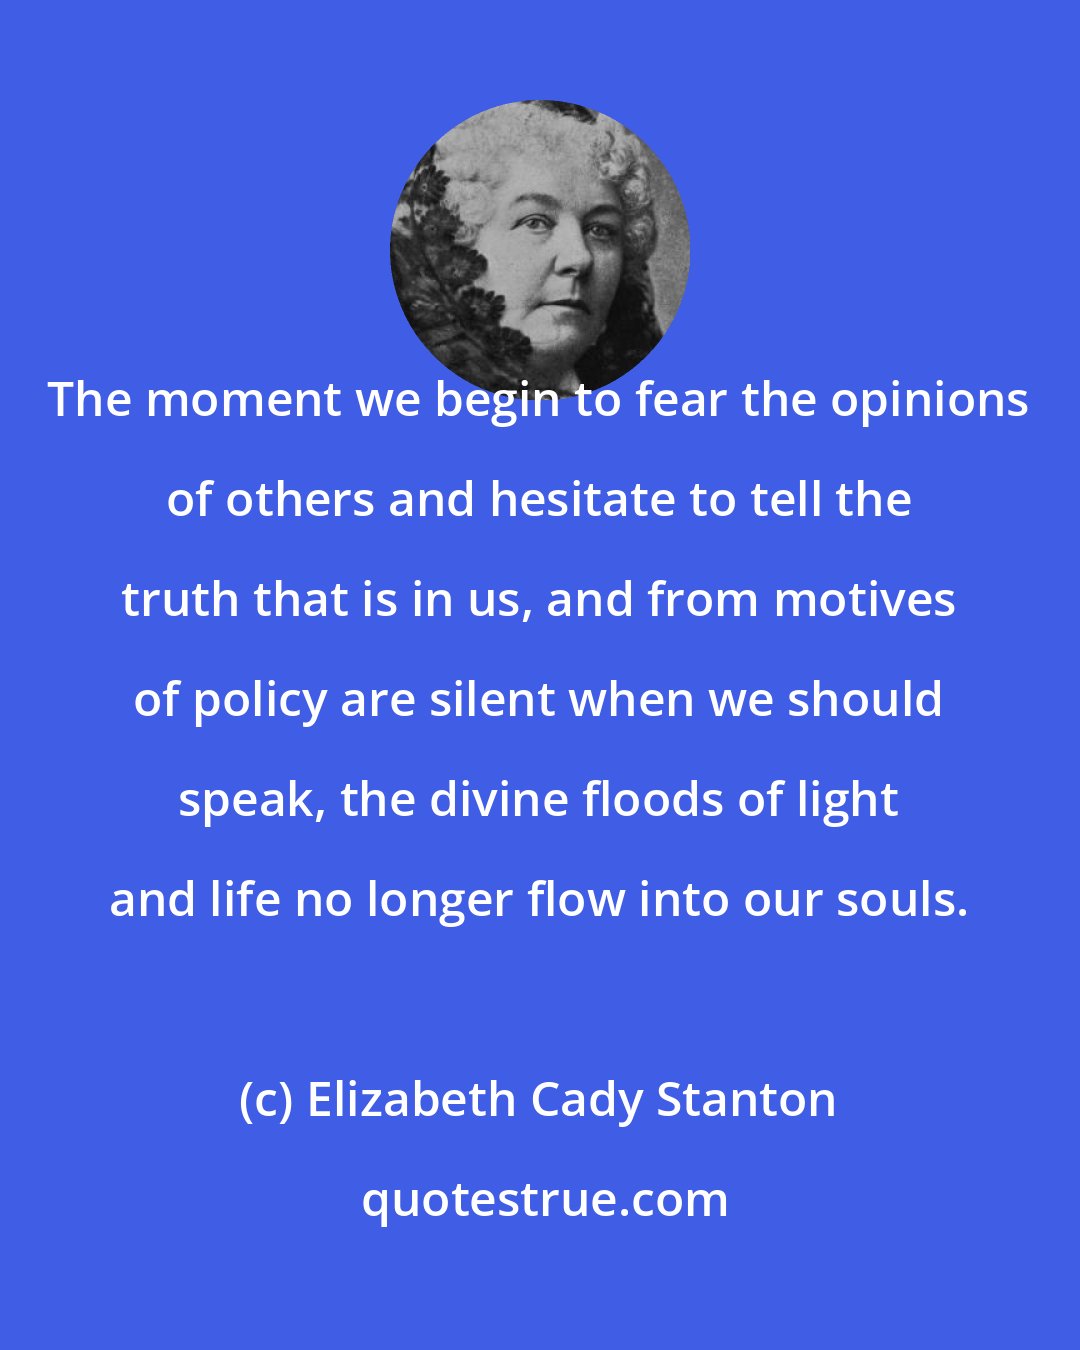 Elizabeth Cady Stanton: The moment we begin to fear the opinions of others and hesitate to tell the truth that is in us, and from motives of policy are silent when we should speak, the divine floods of light and life no longer flow into our souls.